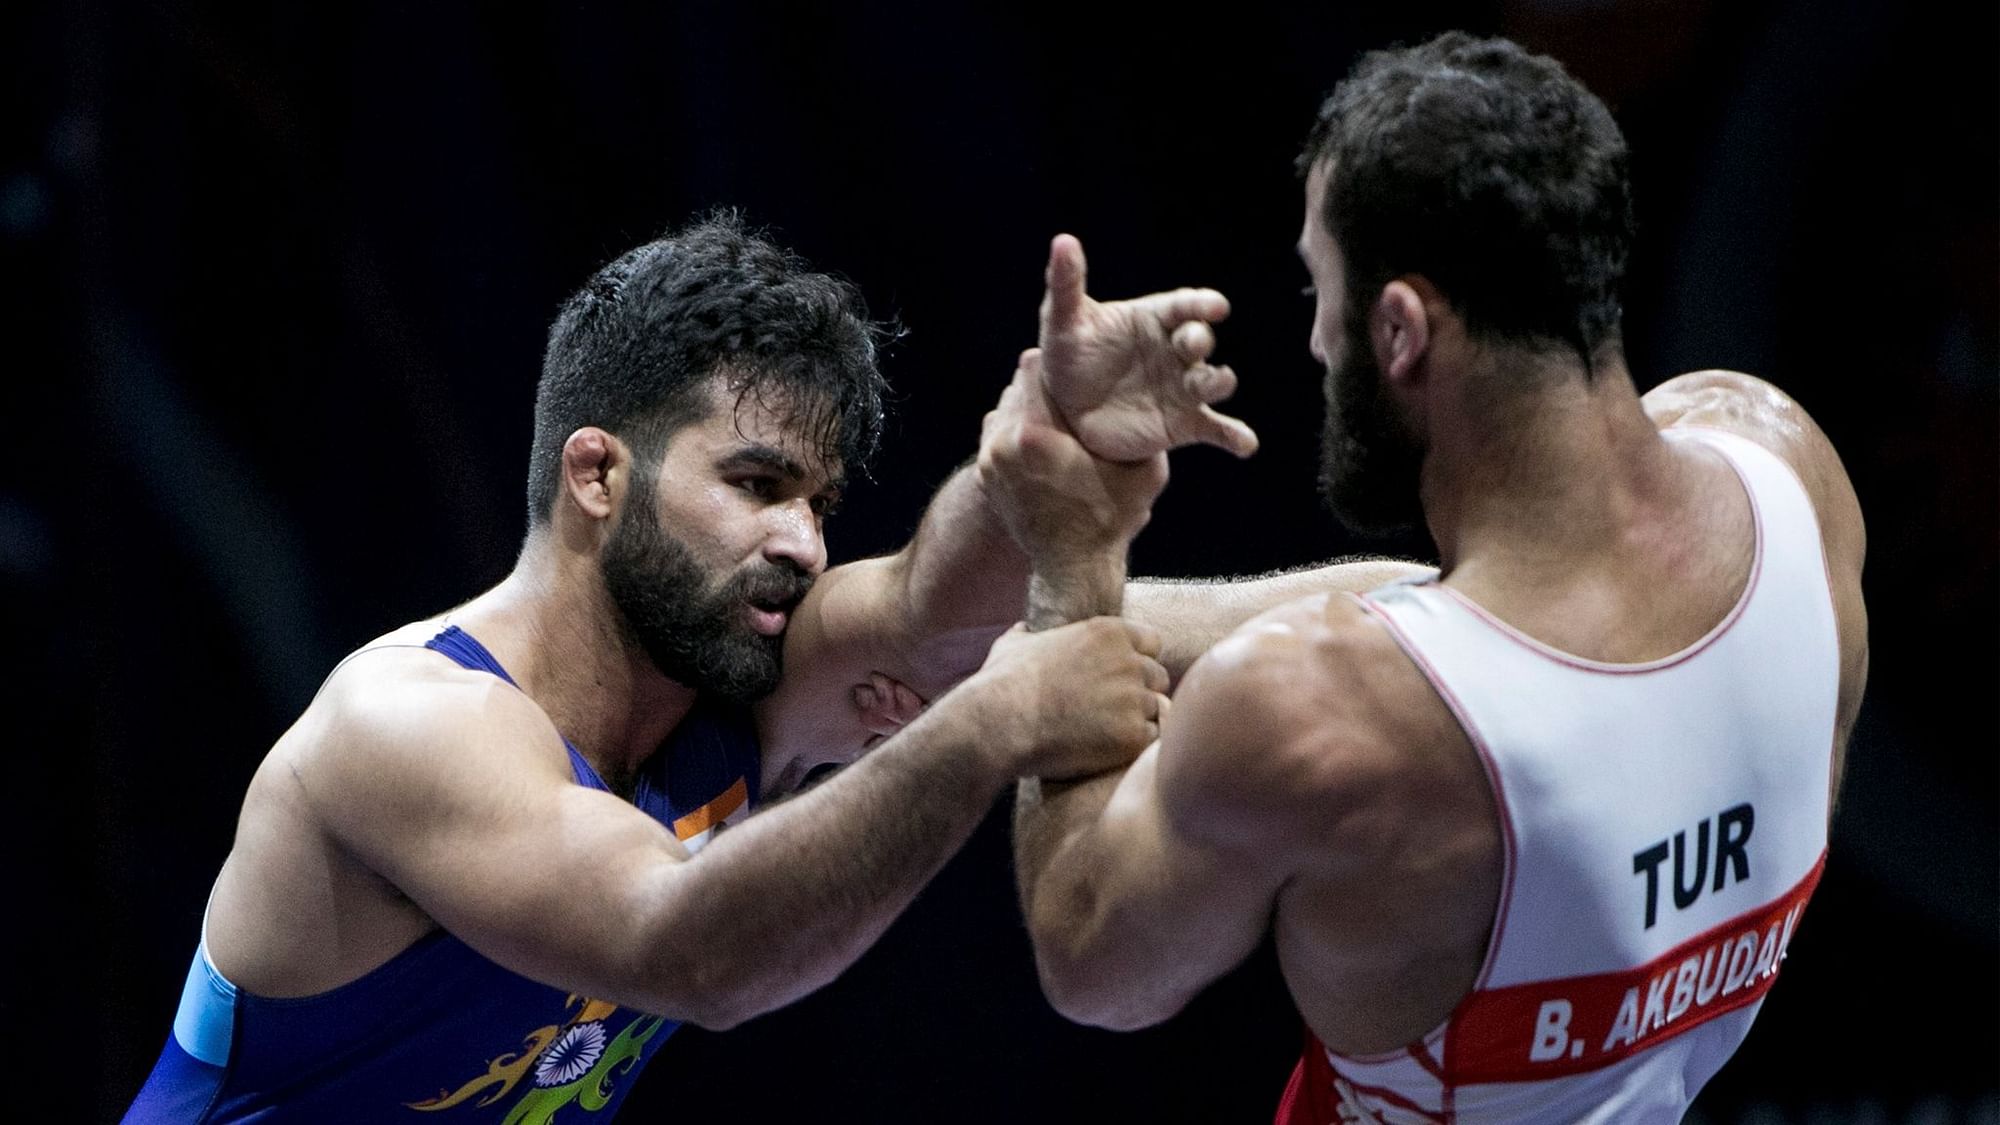 Wrestling Championships 2019 Live Streaming: Gurpreet Singh (77kg) will hope to put on an improved show on Day 3 of the UWW World Senior Wrestling Championships 2019.